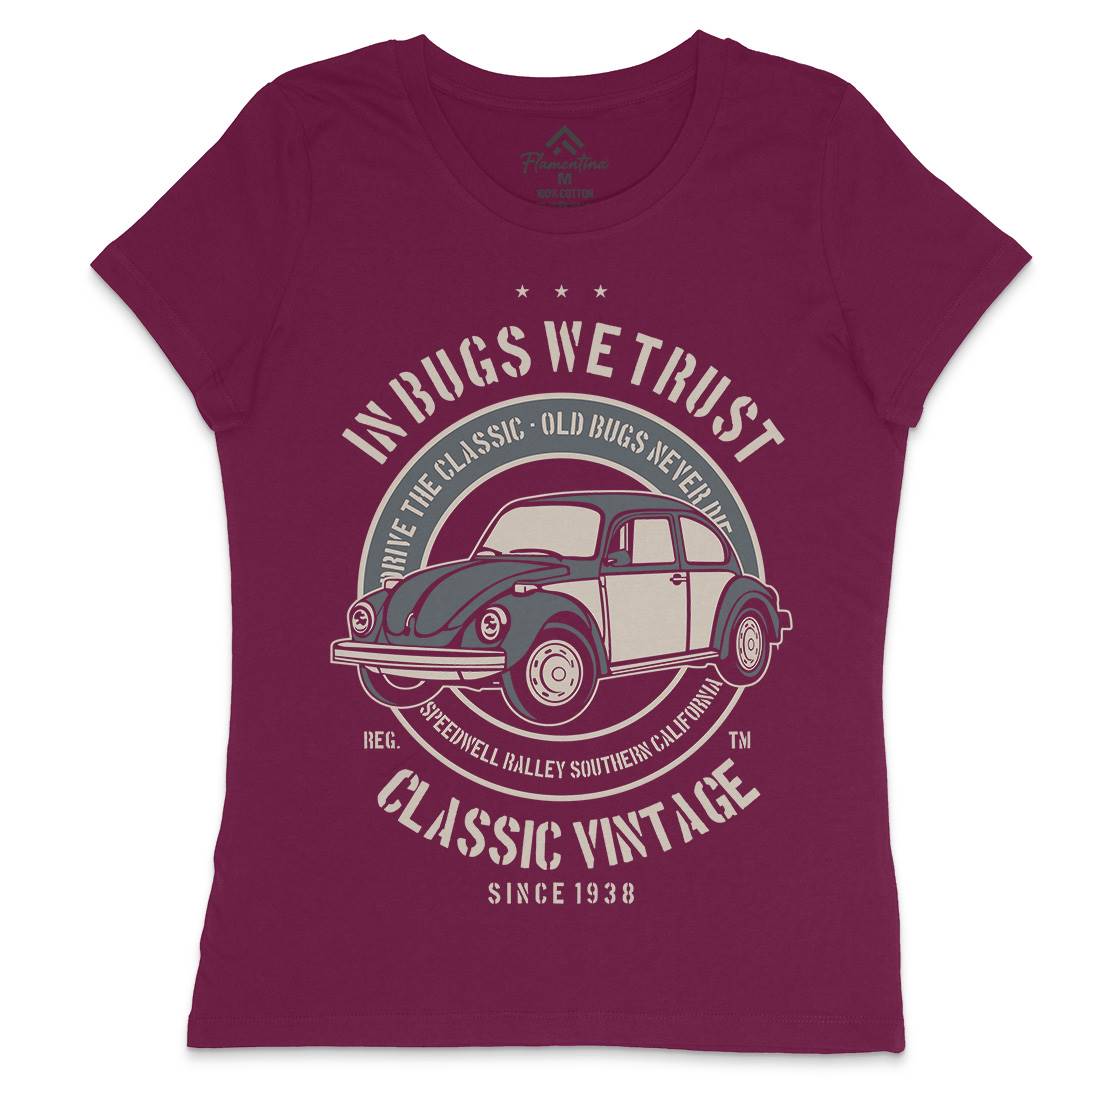 In Bugs We Trust Womens Crew Neck T-Shirt Cars B223